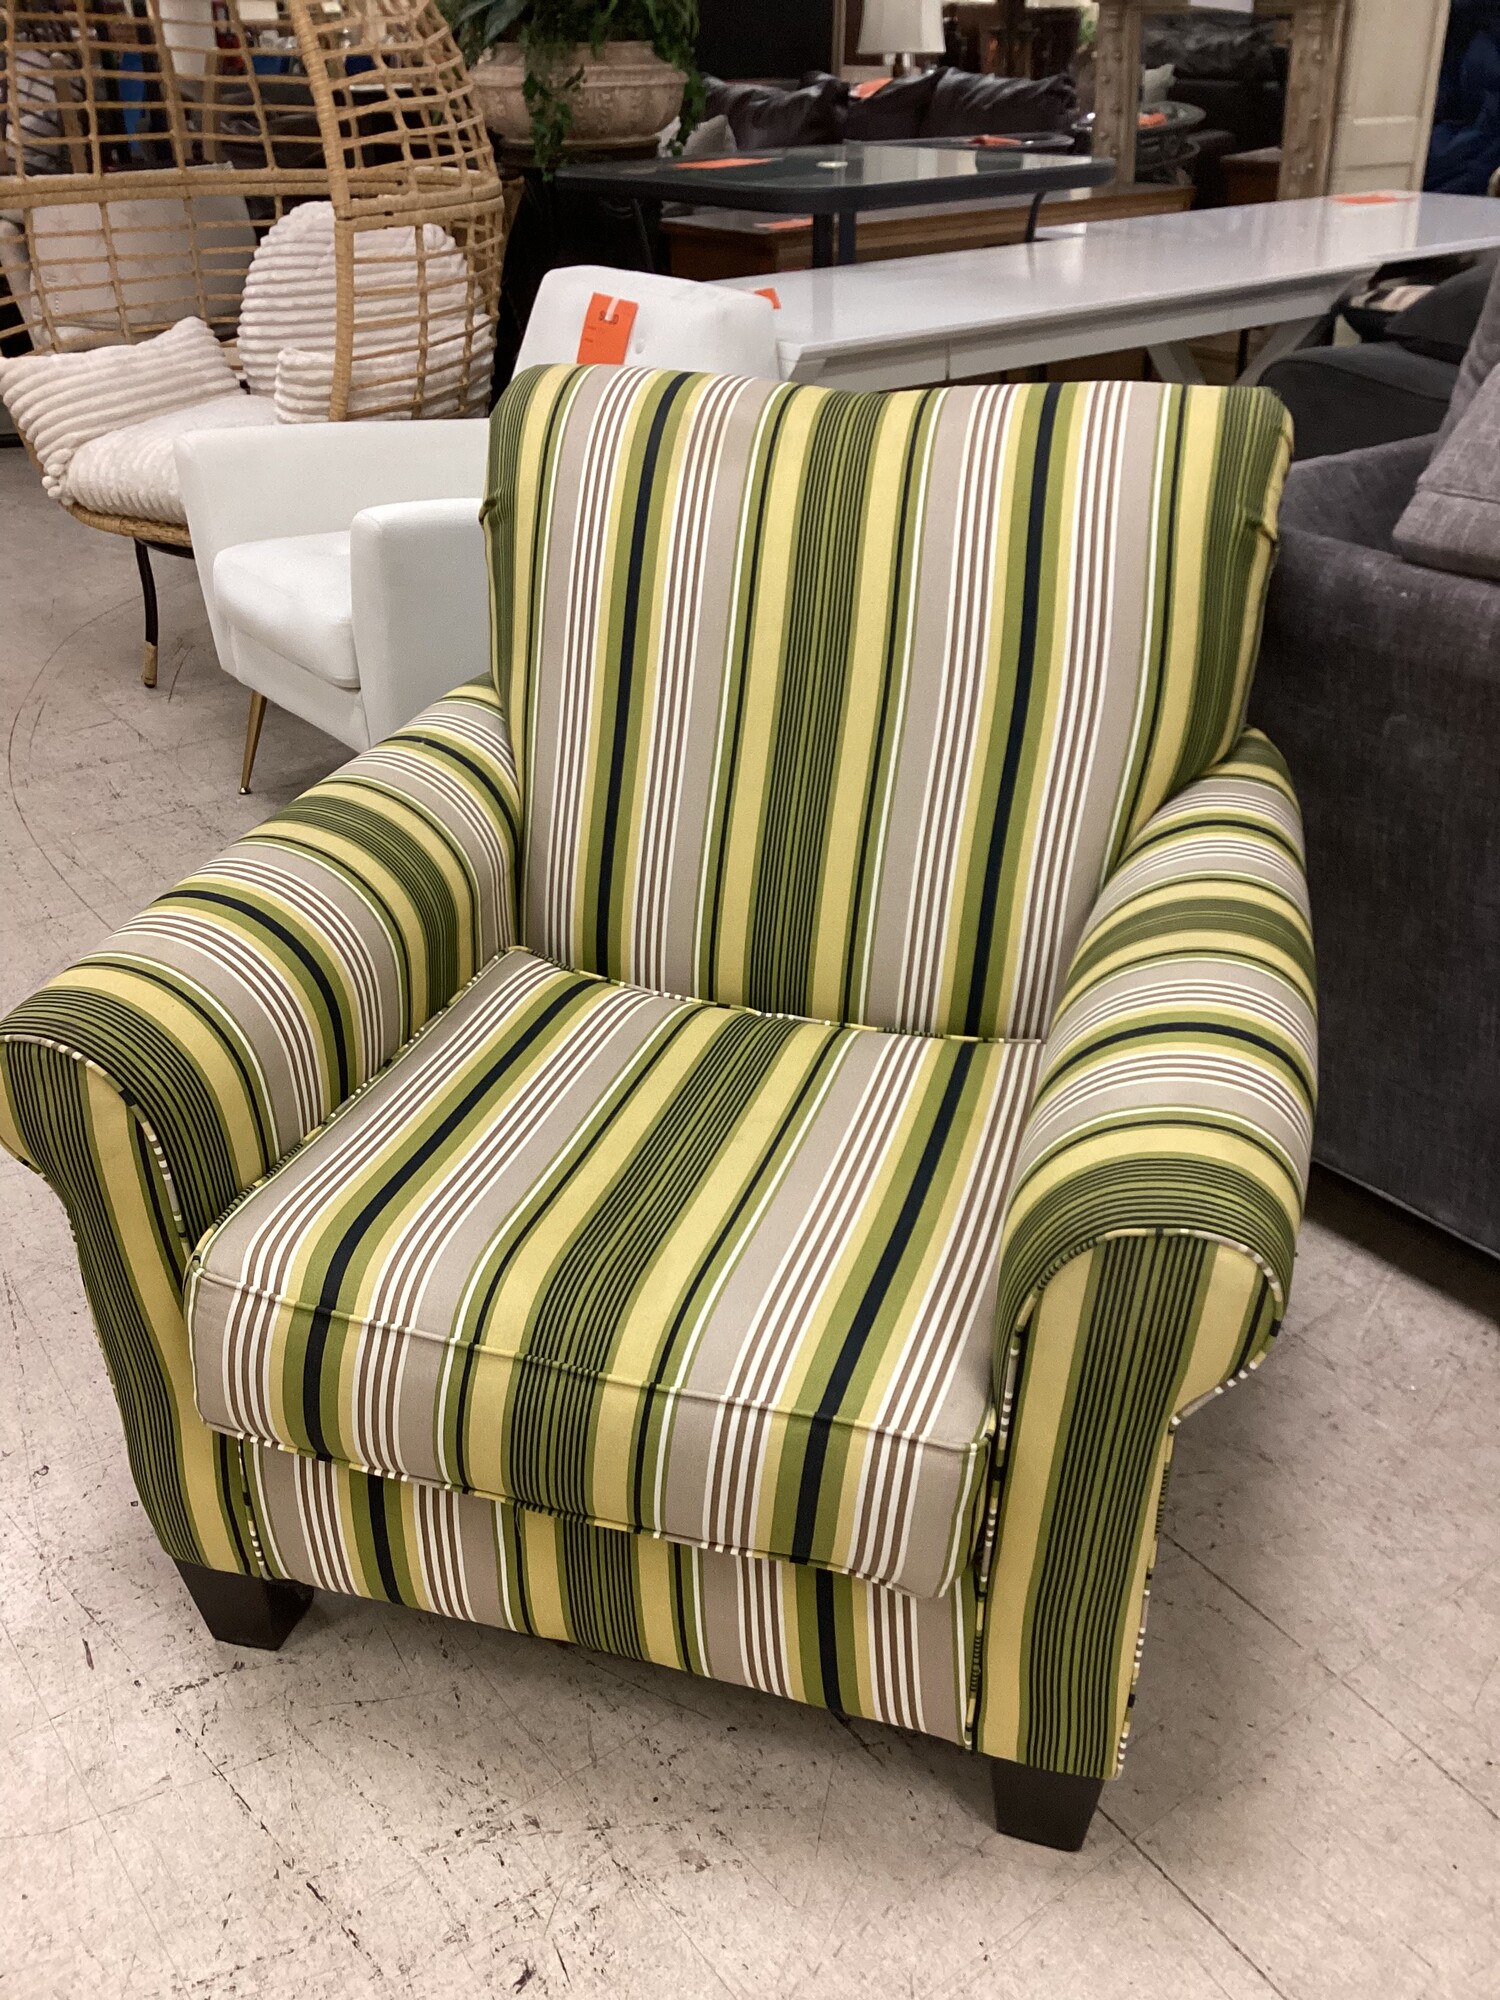 Striped Arm Chair, Green, Yellow
35 In w